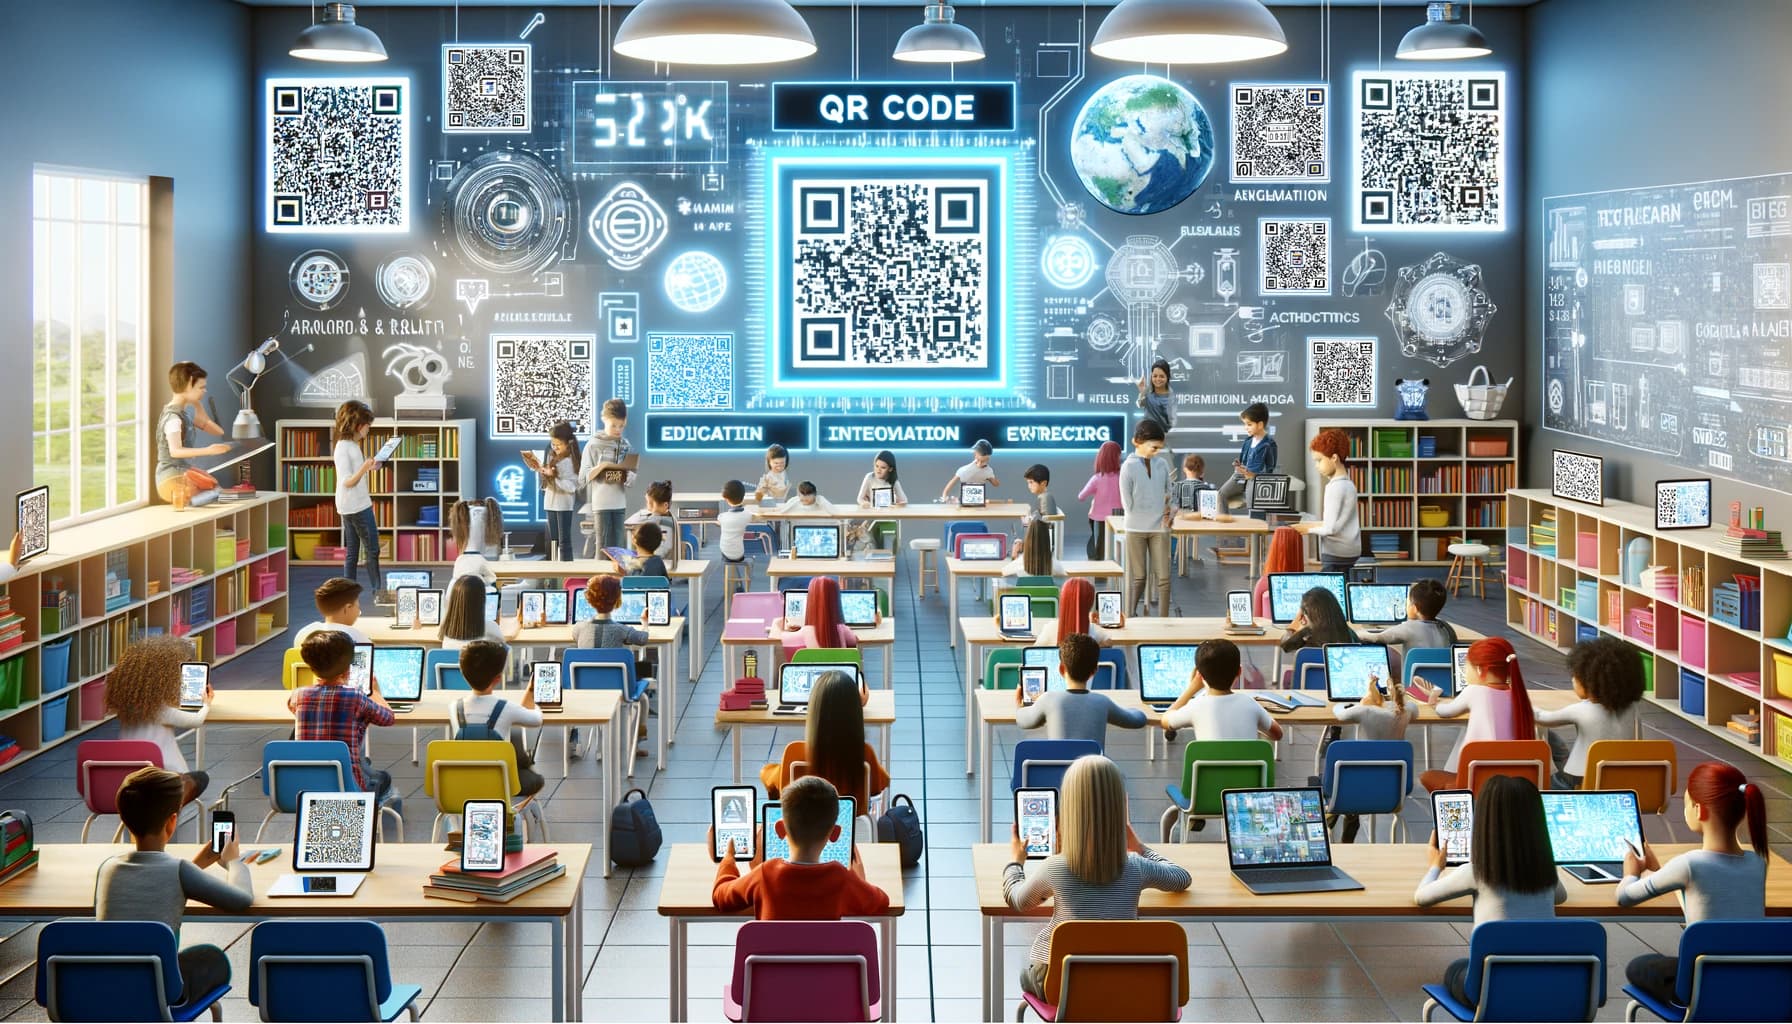 Students in a technology-enhanced classroom with laptops, surrounded by interactive QR code displays on the walls, promoting an engaging educational environment.